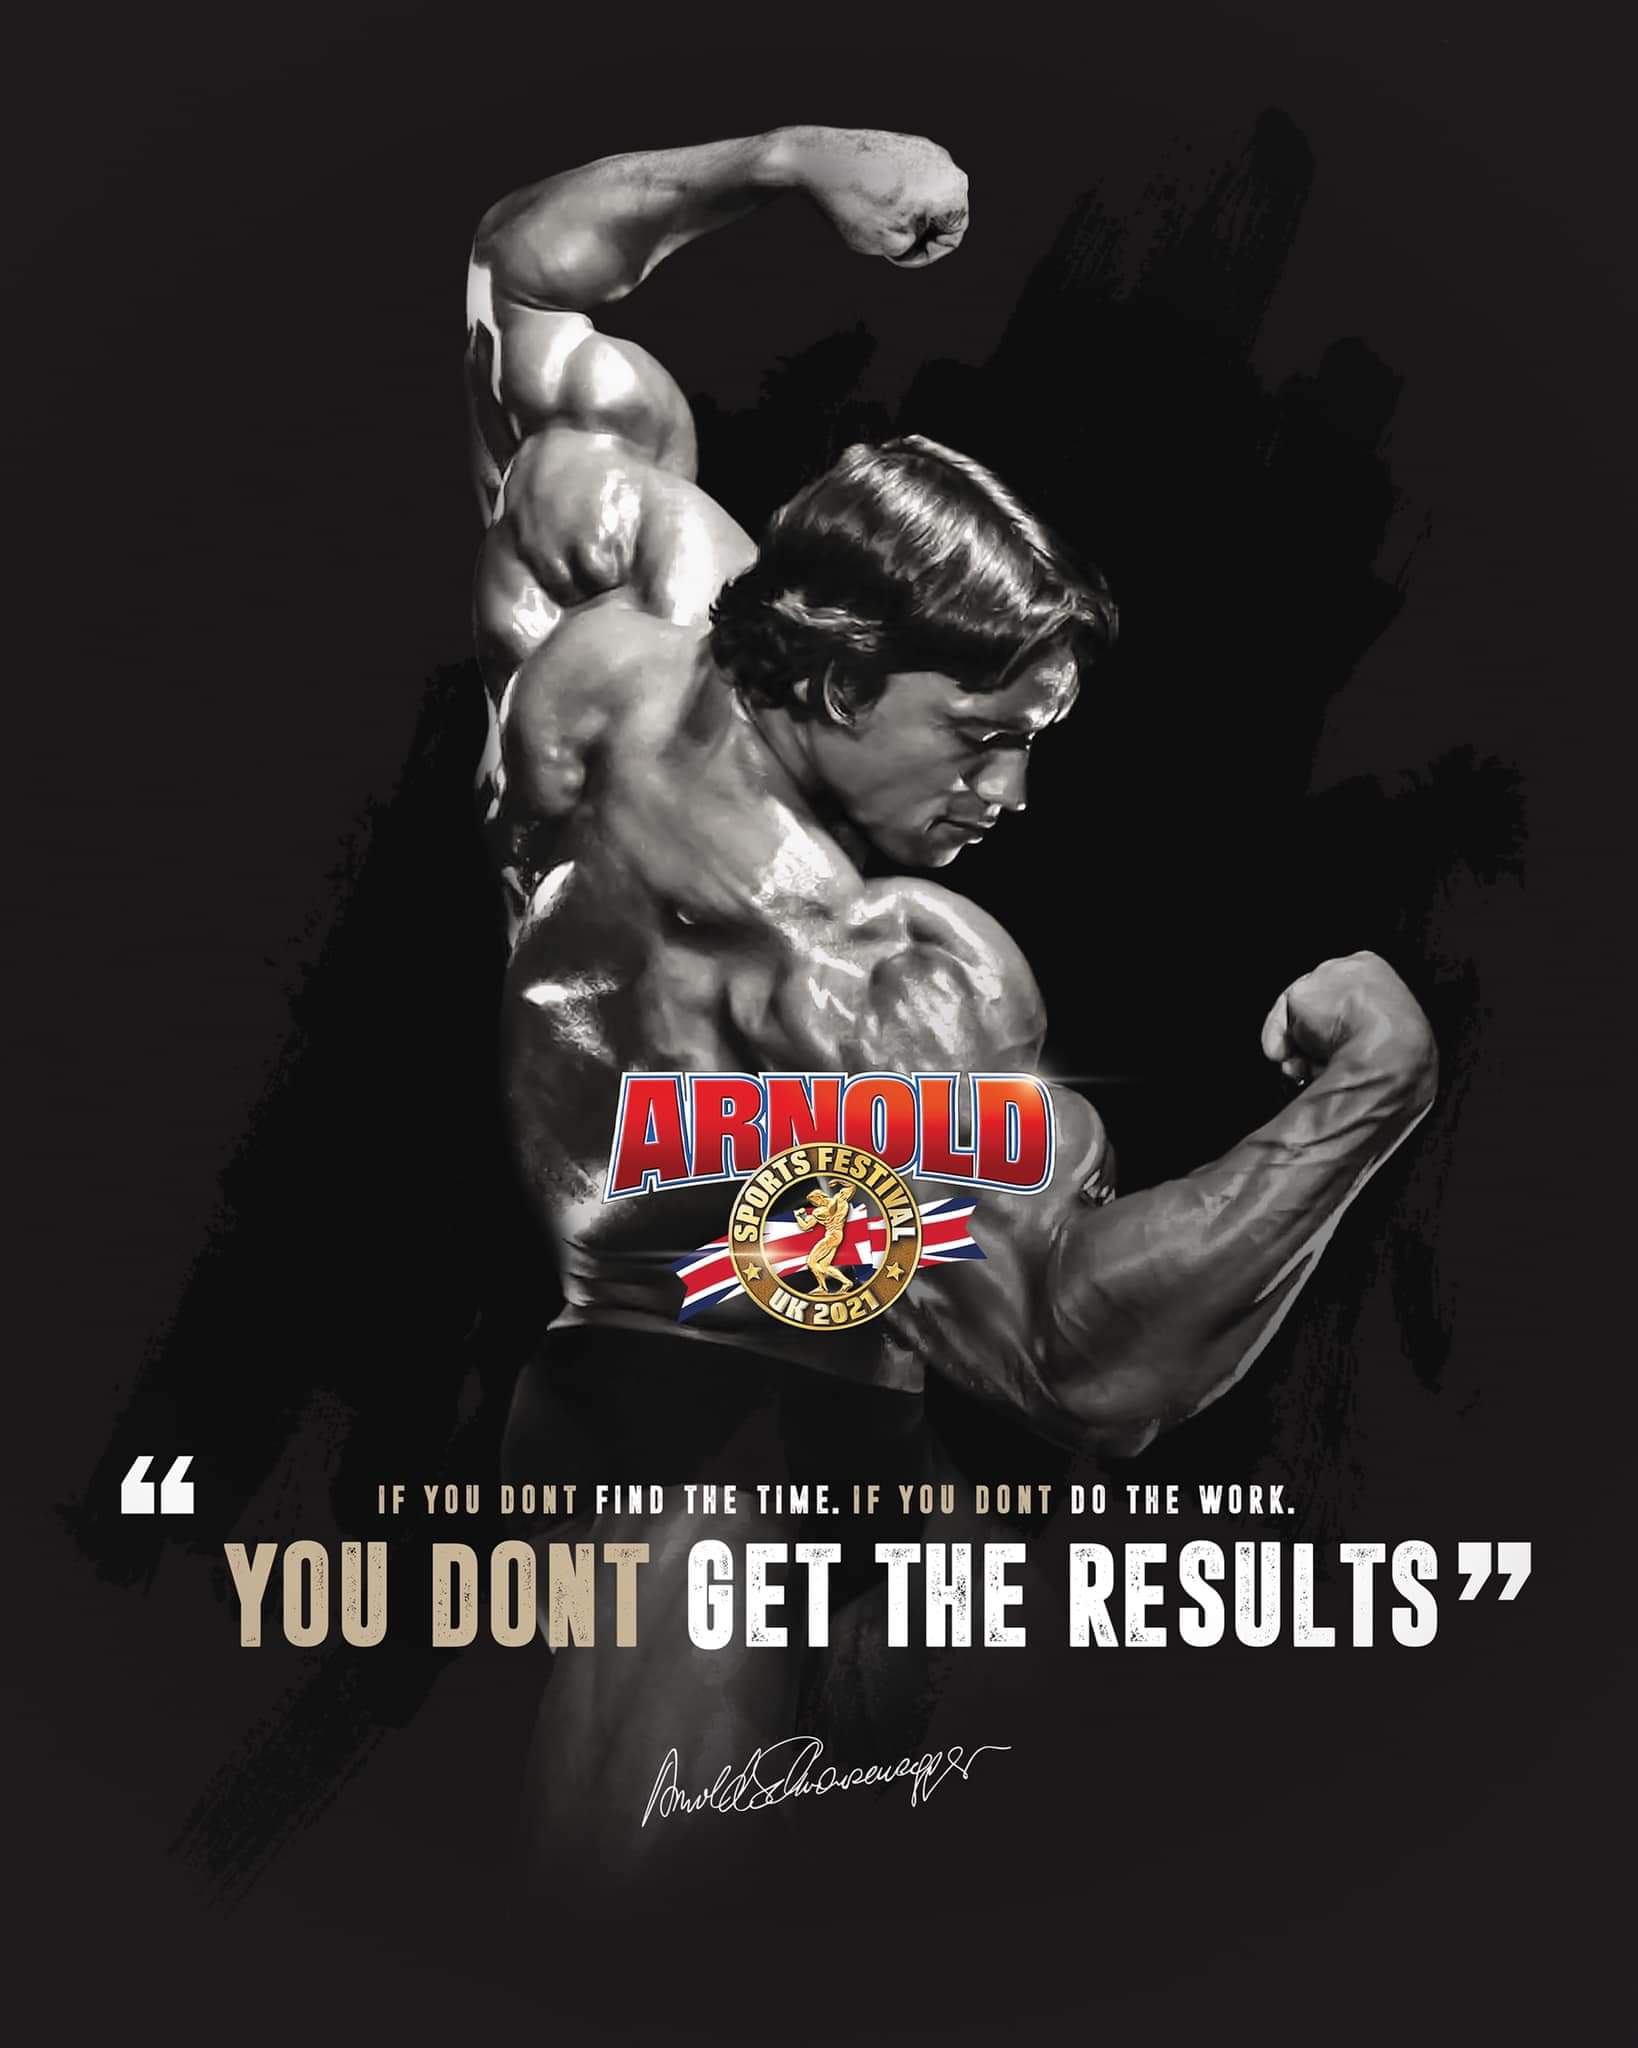 arnold motivation "if you don't find the time, if you don't do the work, you don't get the results"